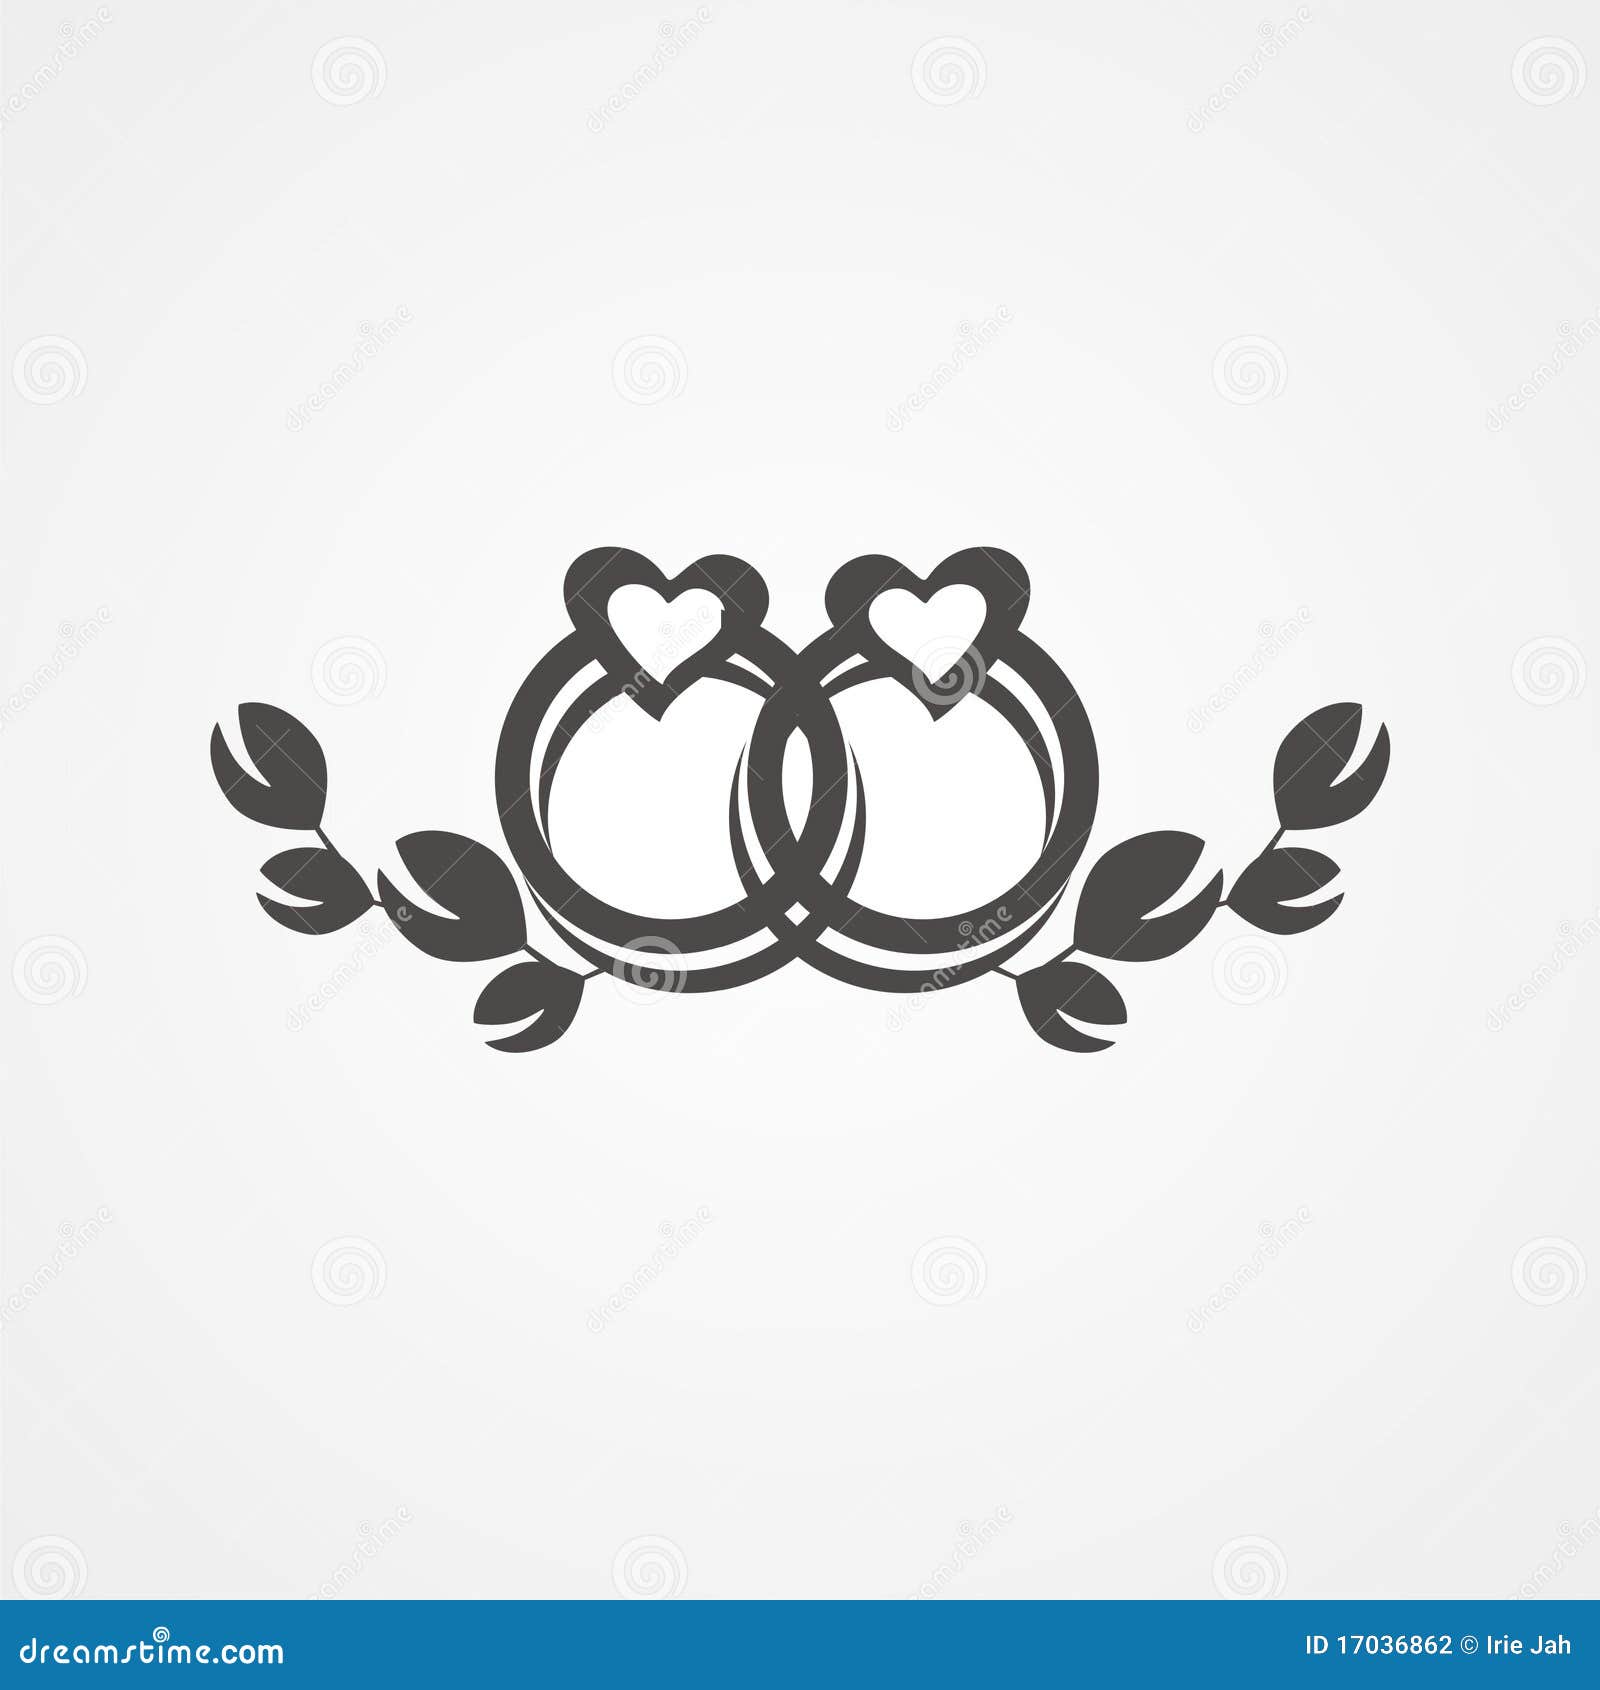 linked wedding rings clipart - photo #50